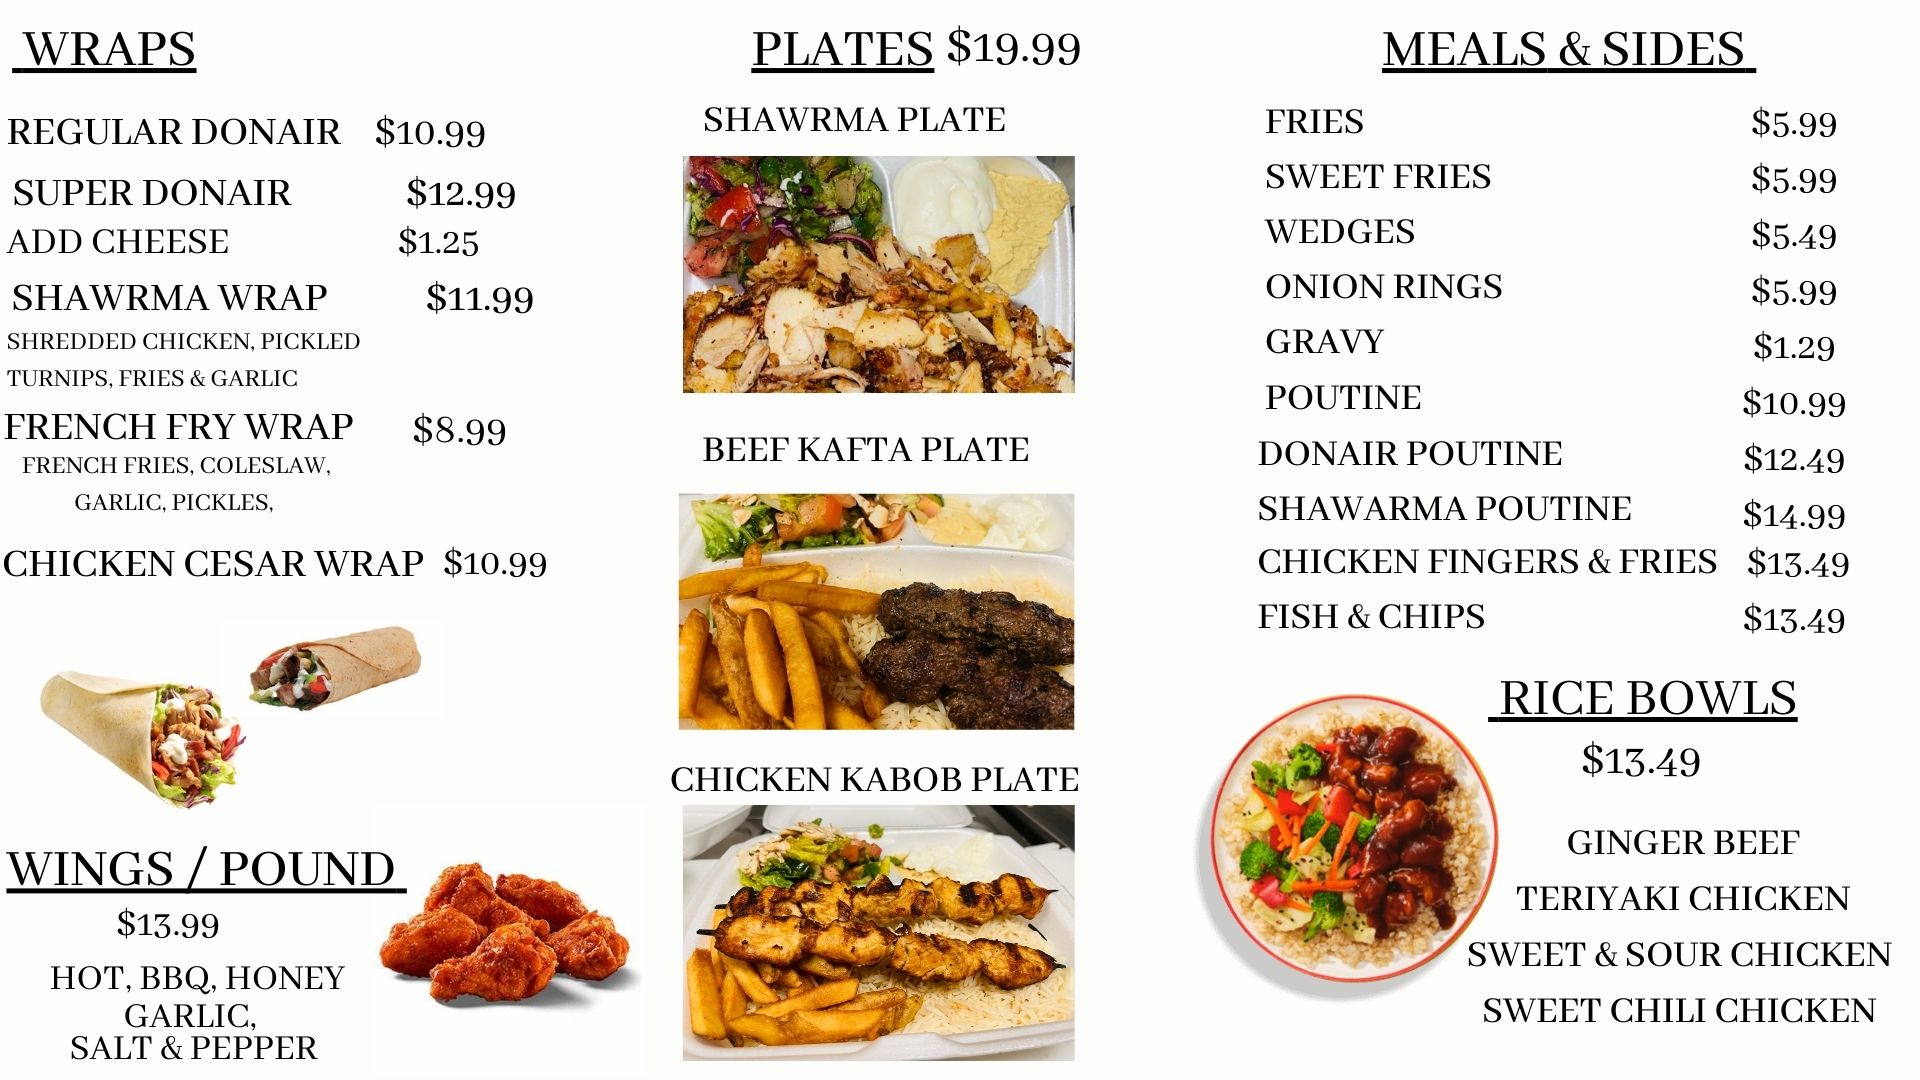 Wraps, Wings, Plates, Meals & Sides, Rice Bowls